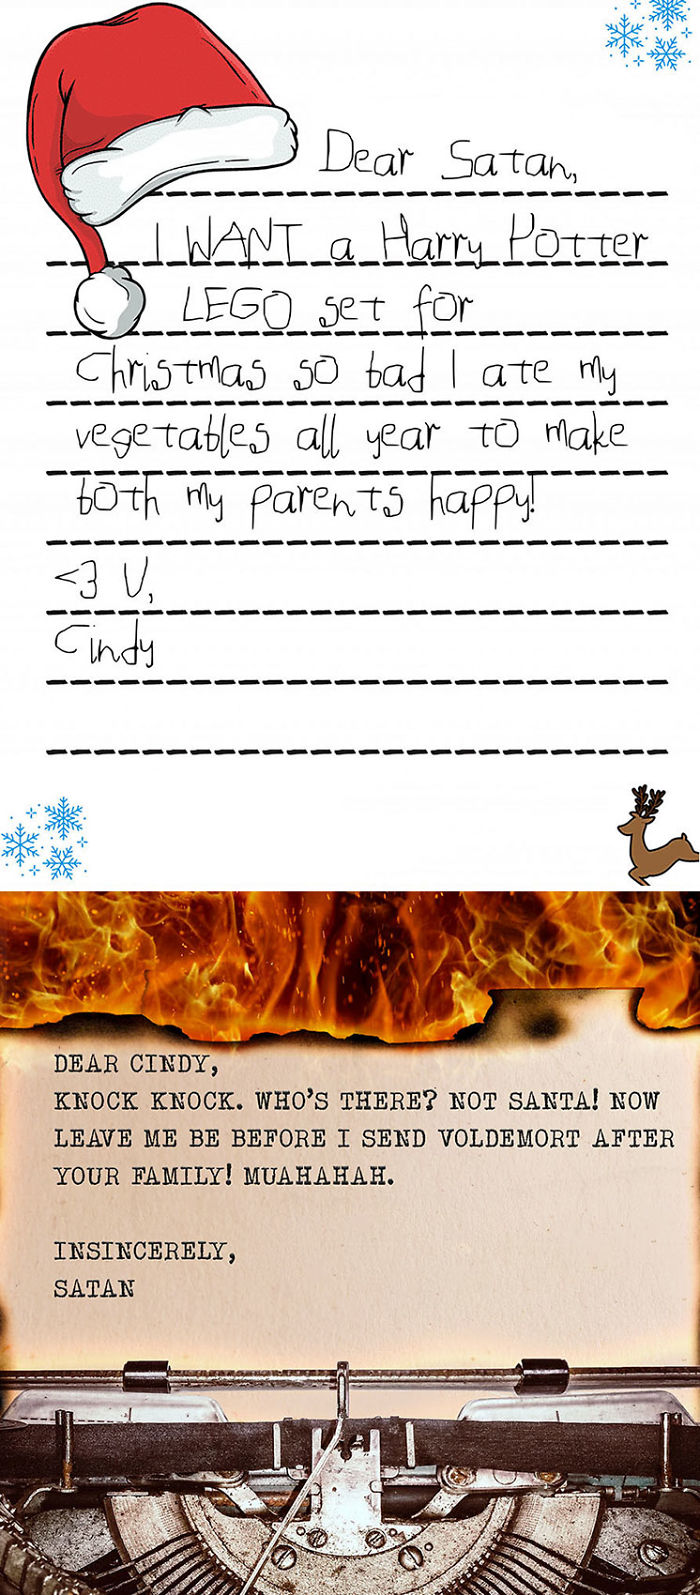 Due To Typos, Millions Of Children Mail Letters To Satan On Christmas And Here Are His Replies